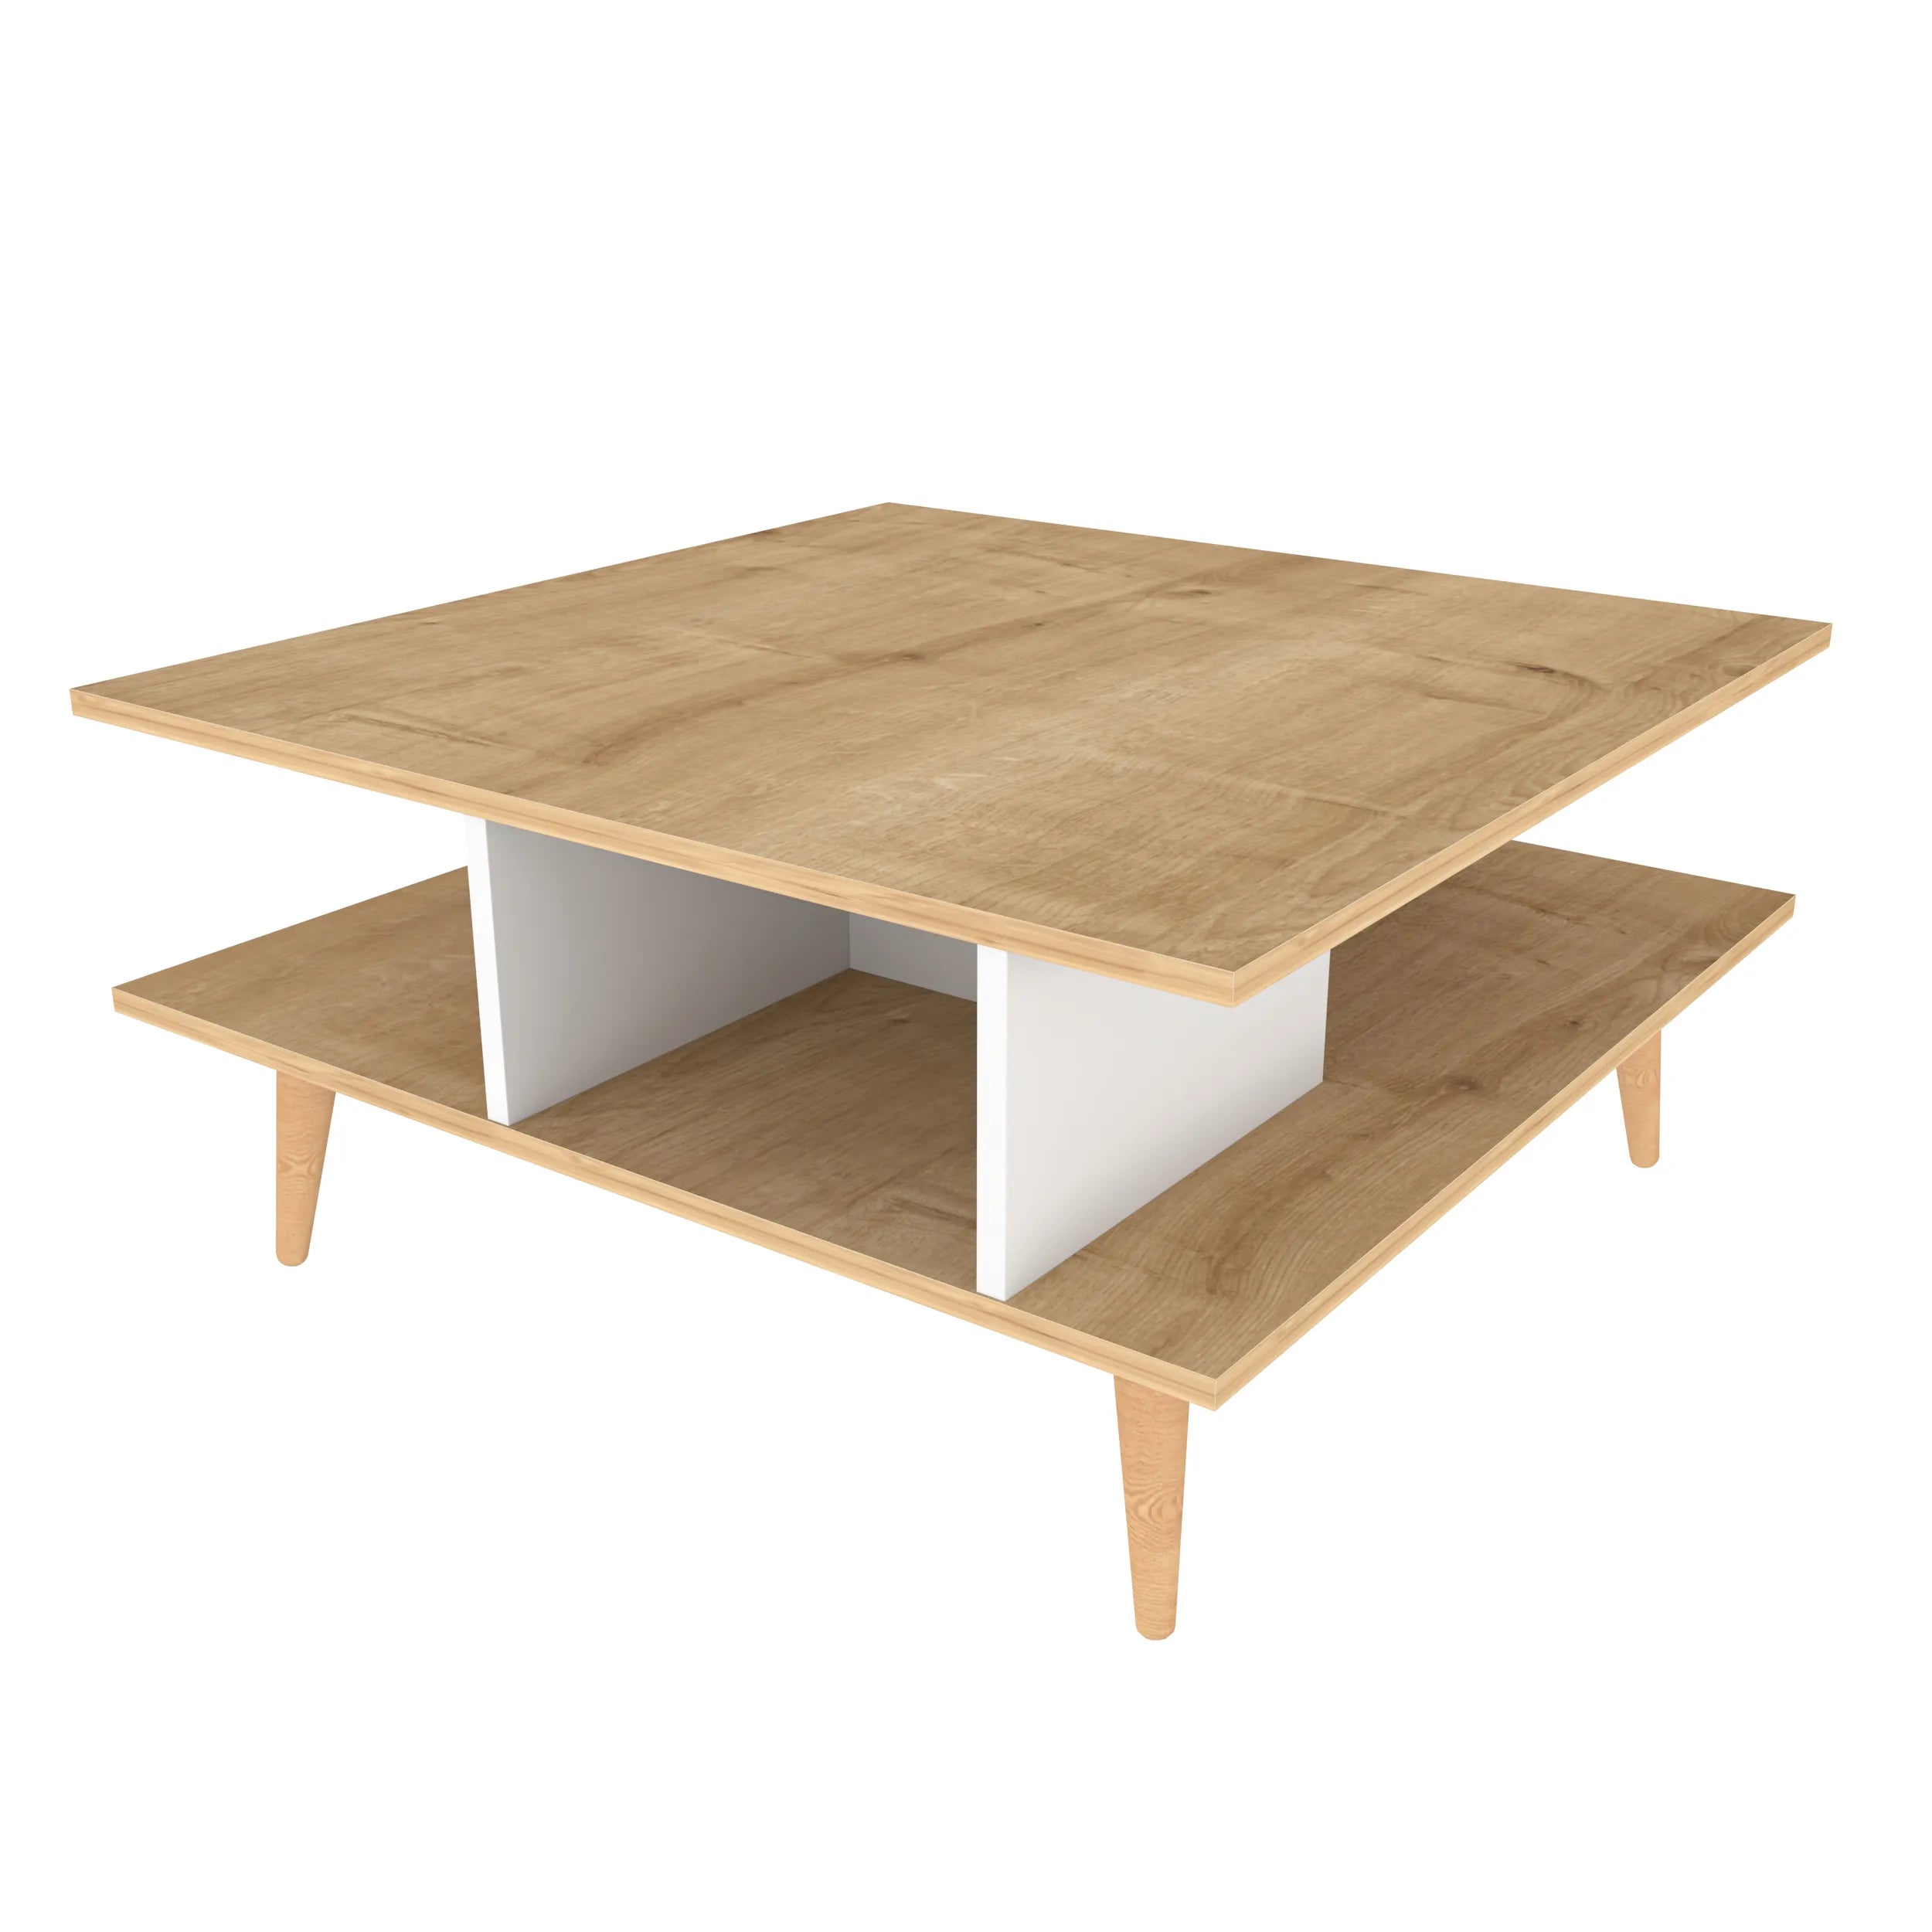 Akya 35 inch Wide Square Coffee Table with Open Shelf Storage